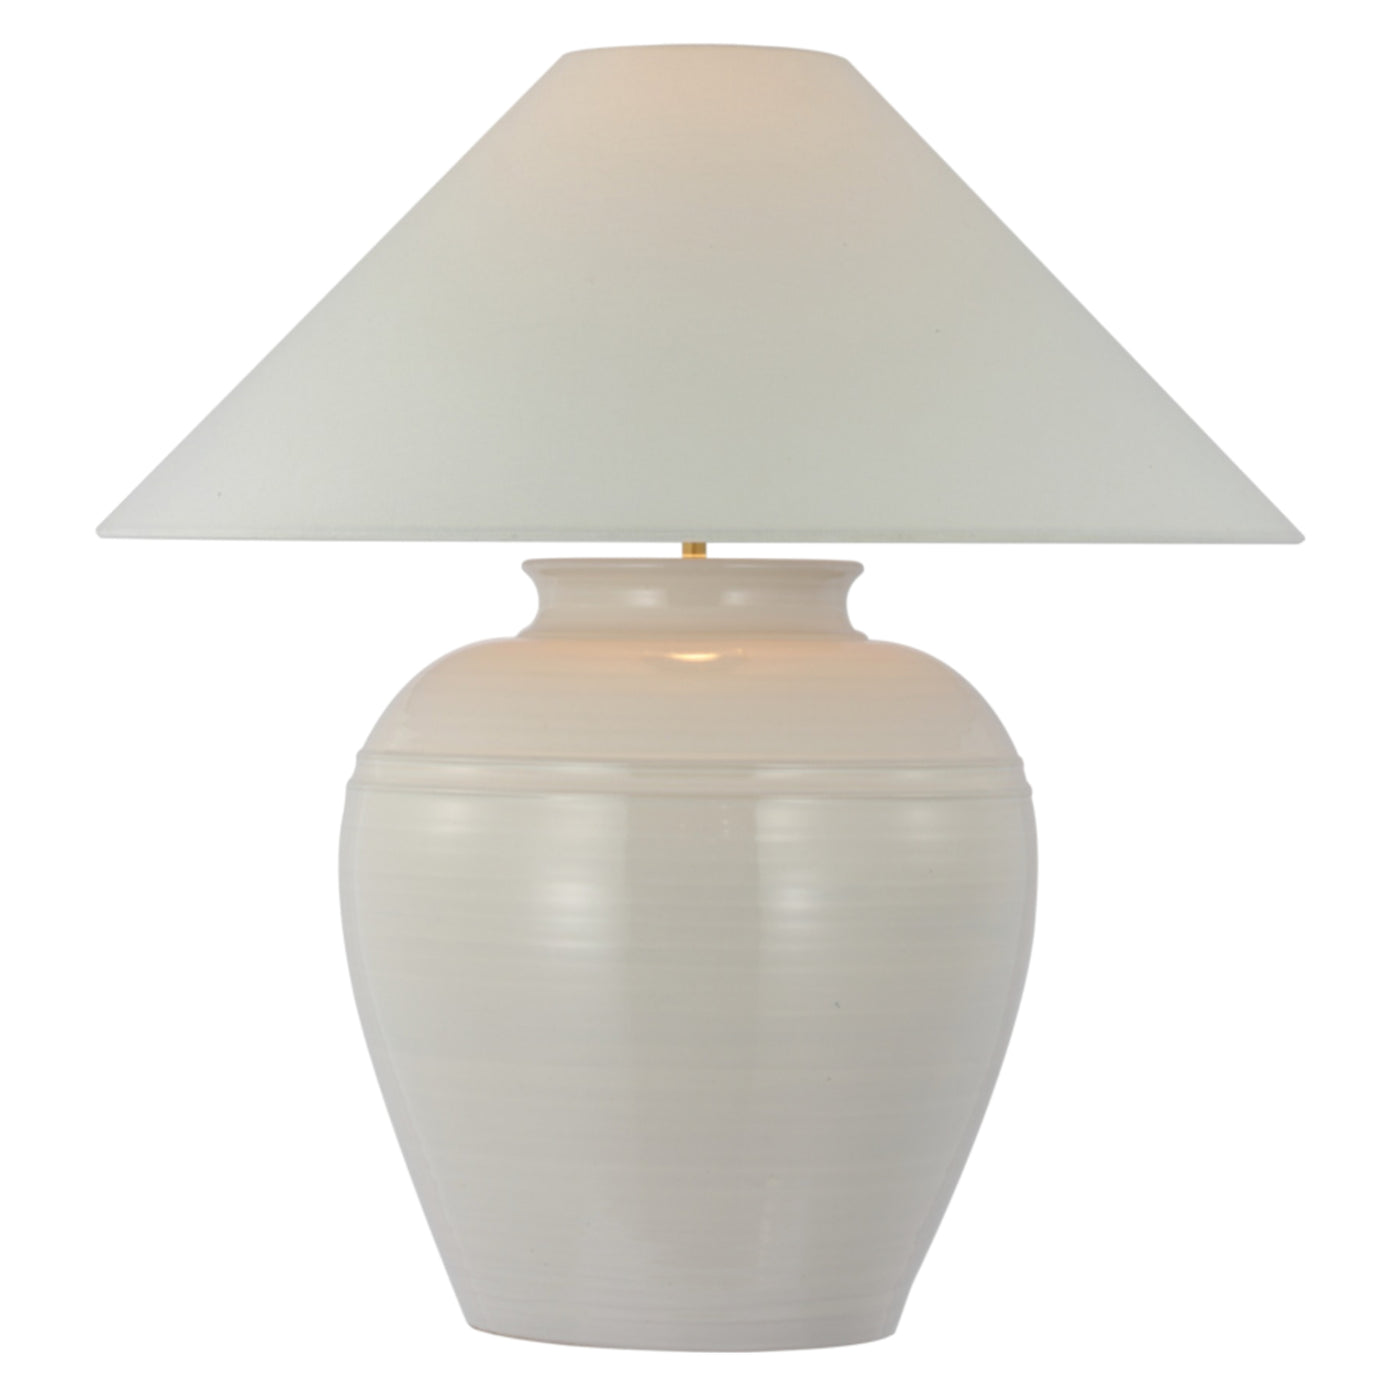 Extra large table lamp